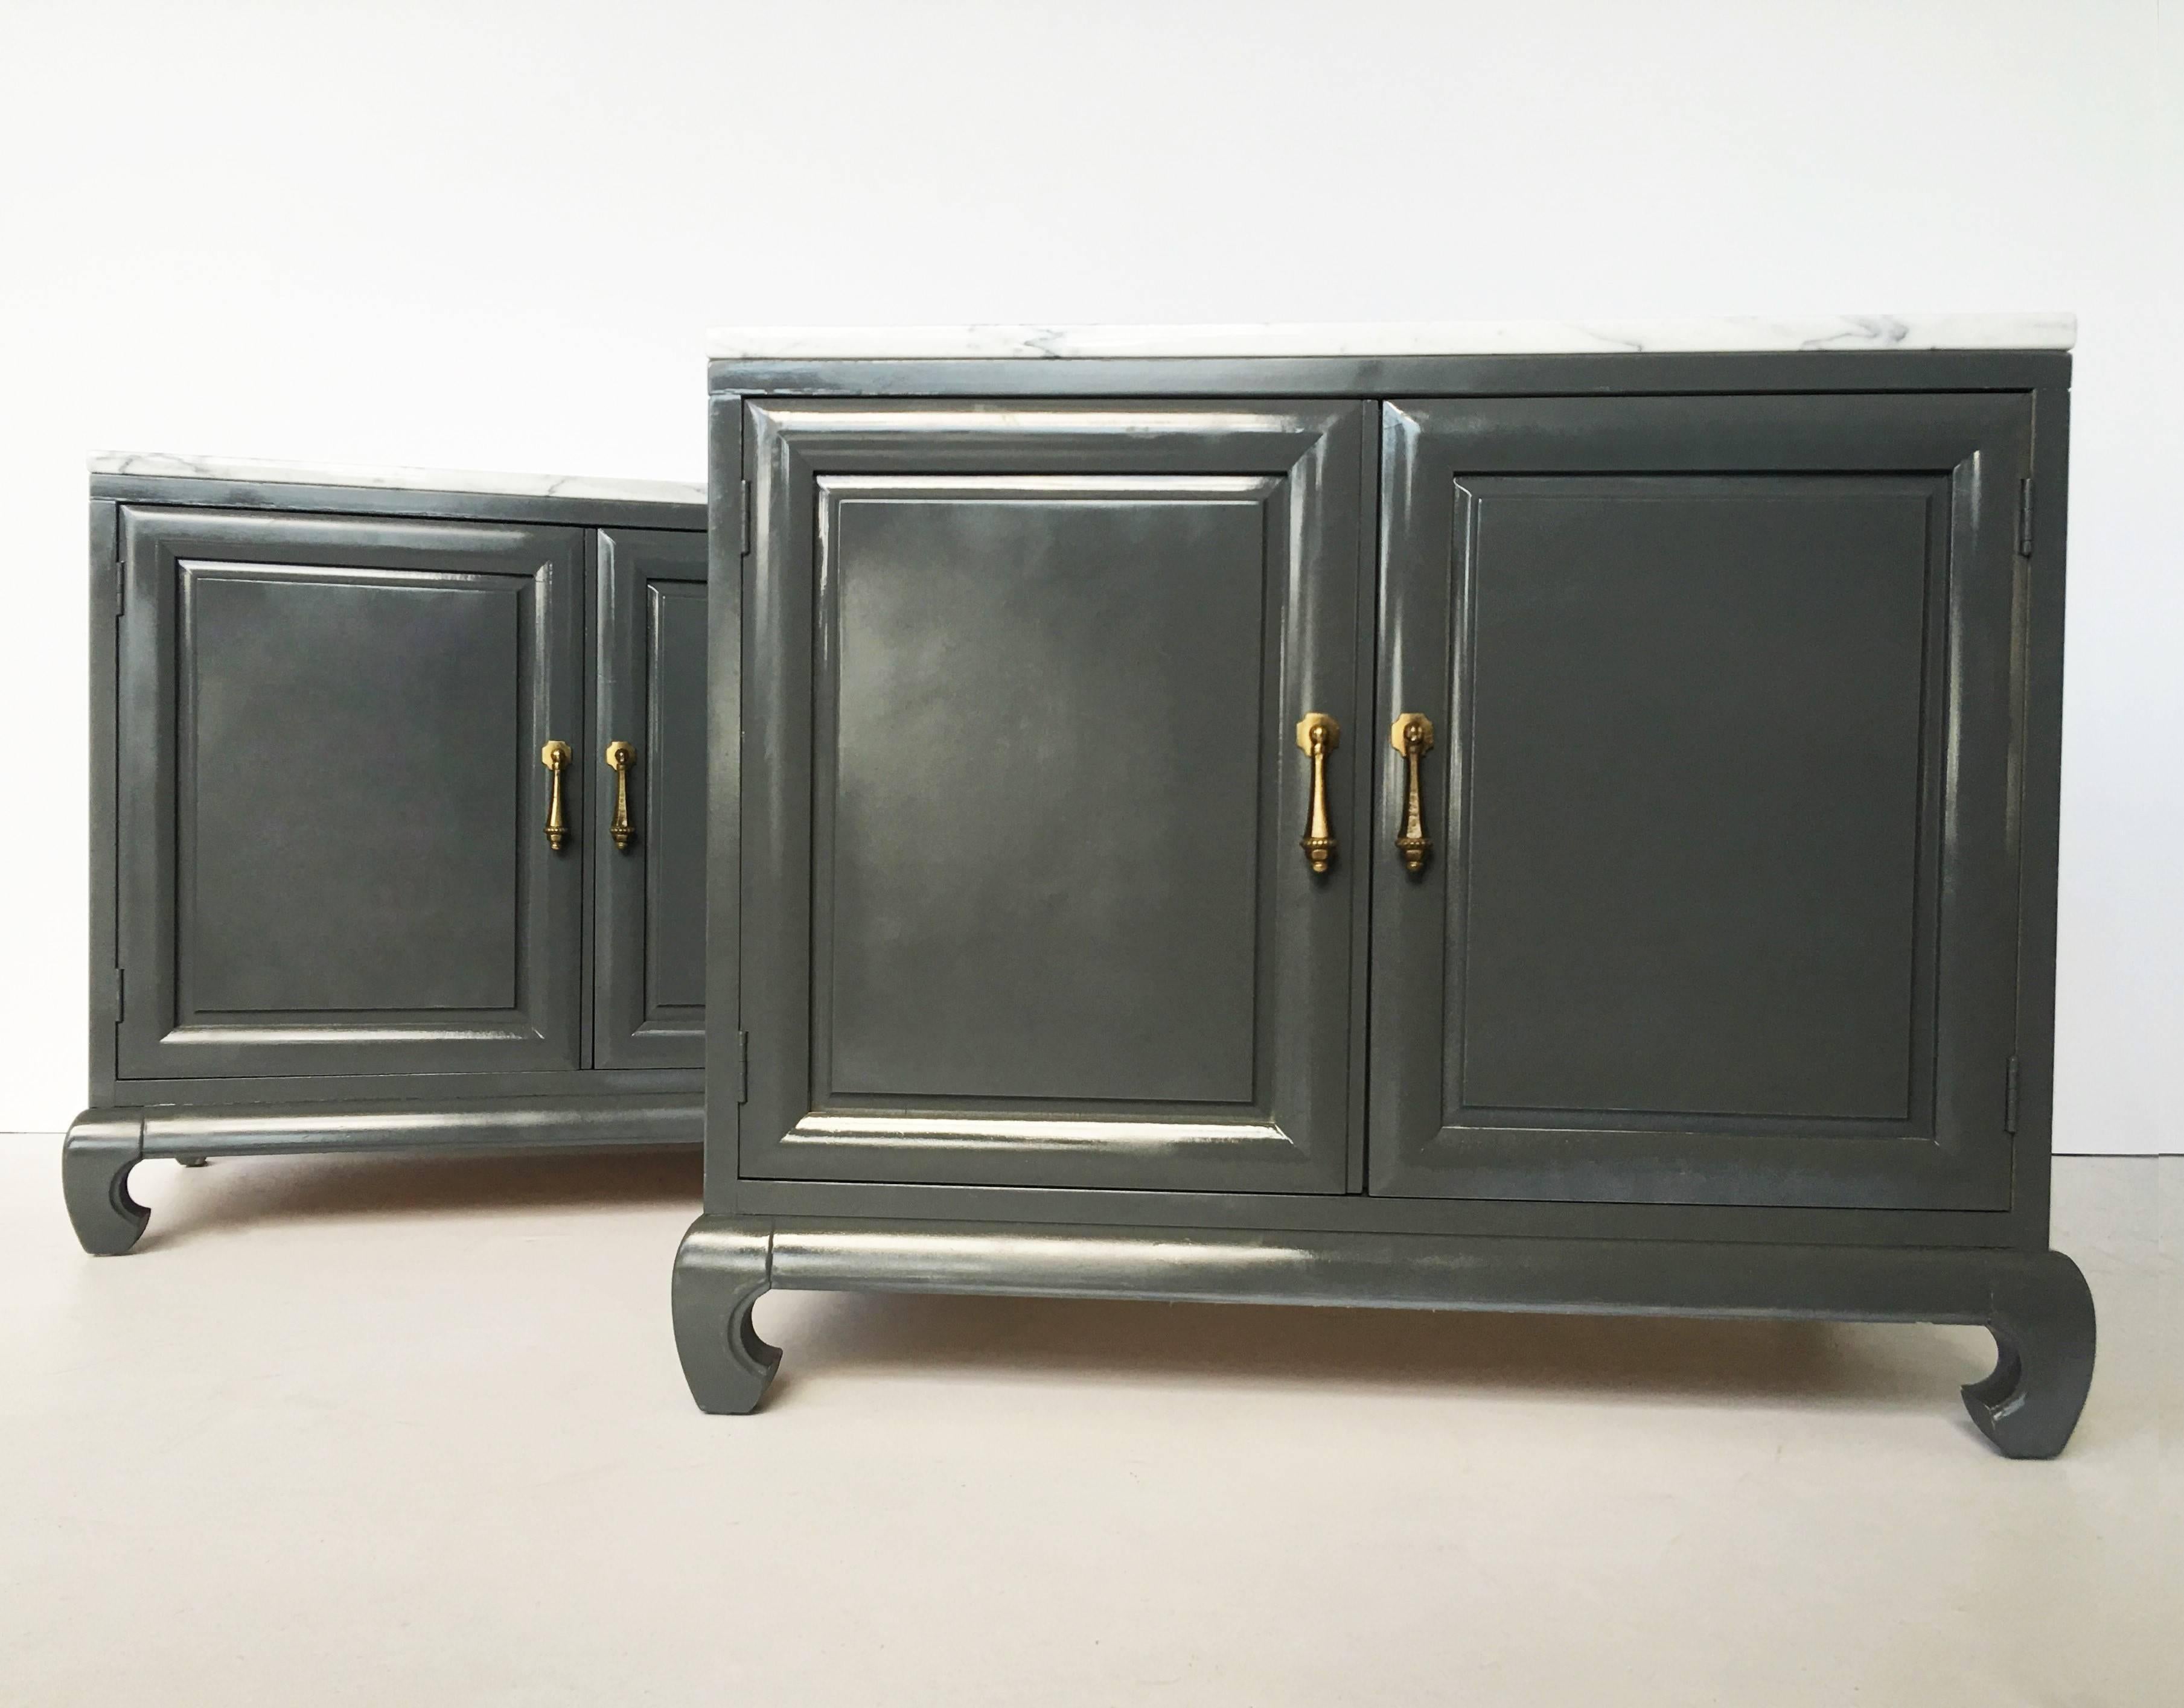 A pair of stunning Asian influenced styling cabinets made of wood and lacquered in a dark silver-gray tone. Each cabinet has two doors in the front with brass hardware pulls. Ming style turned legs. The interior has one shelf. These are beautiful